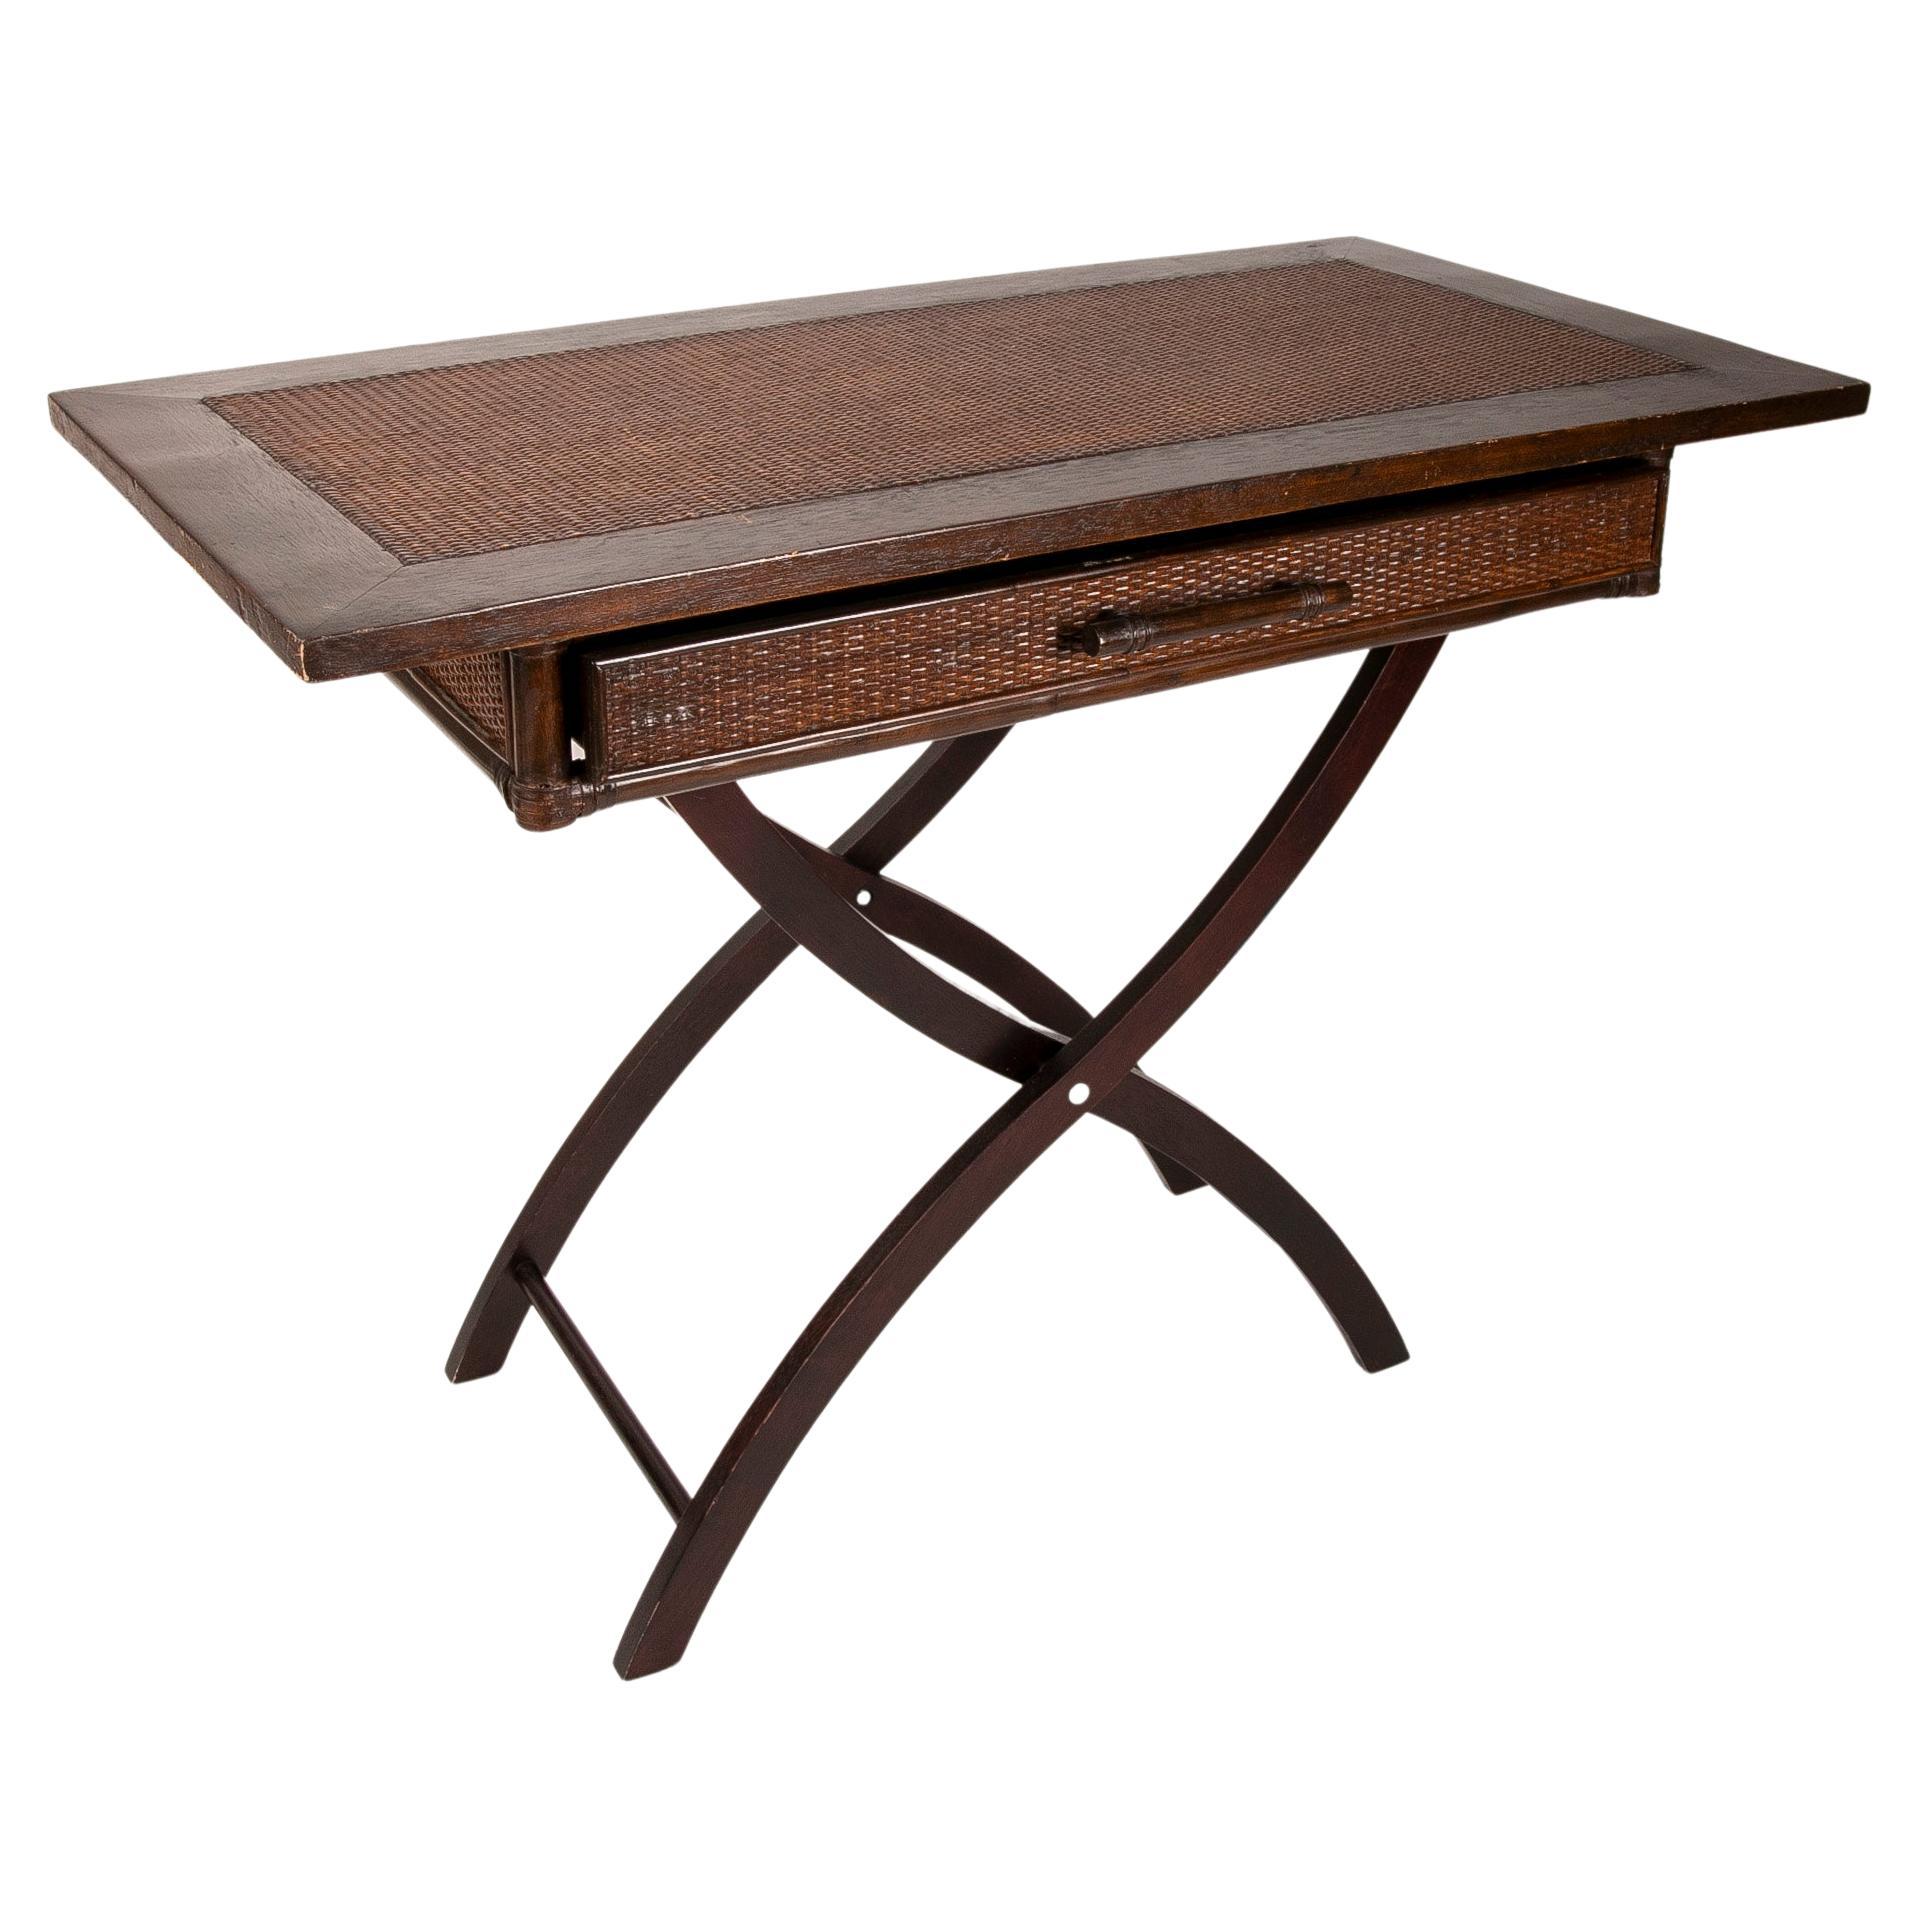 Wooden and Wicker Folding Table with Frontal Drawer For Sale